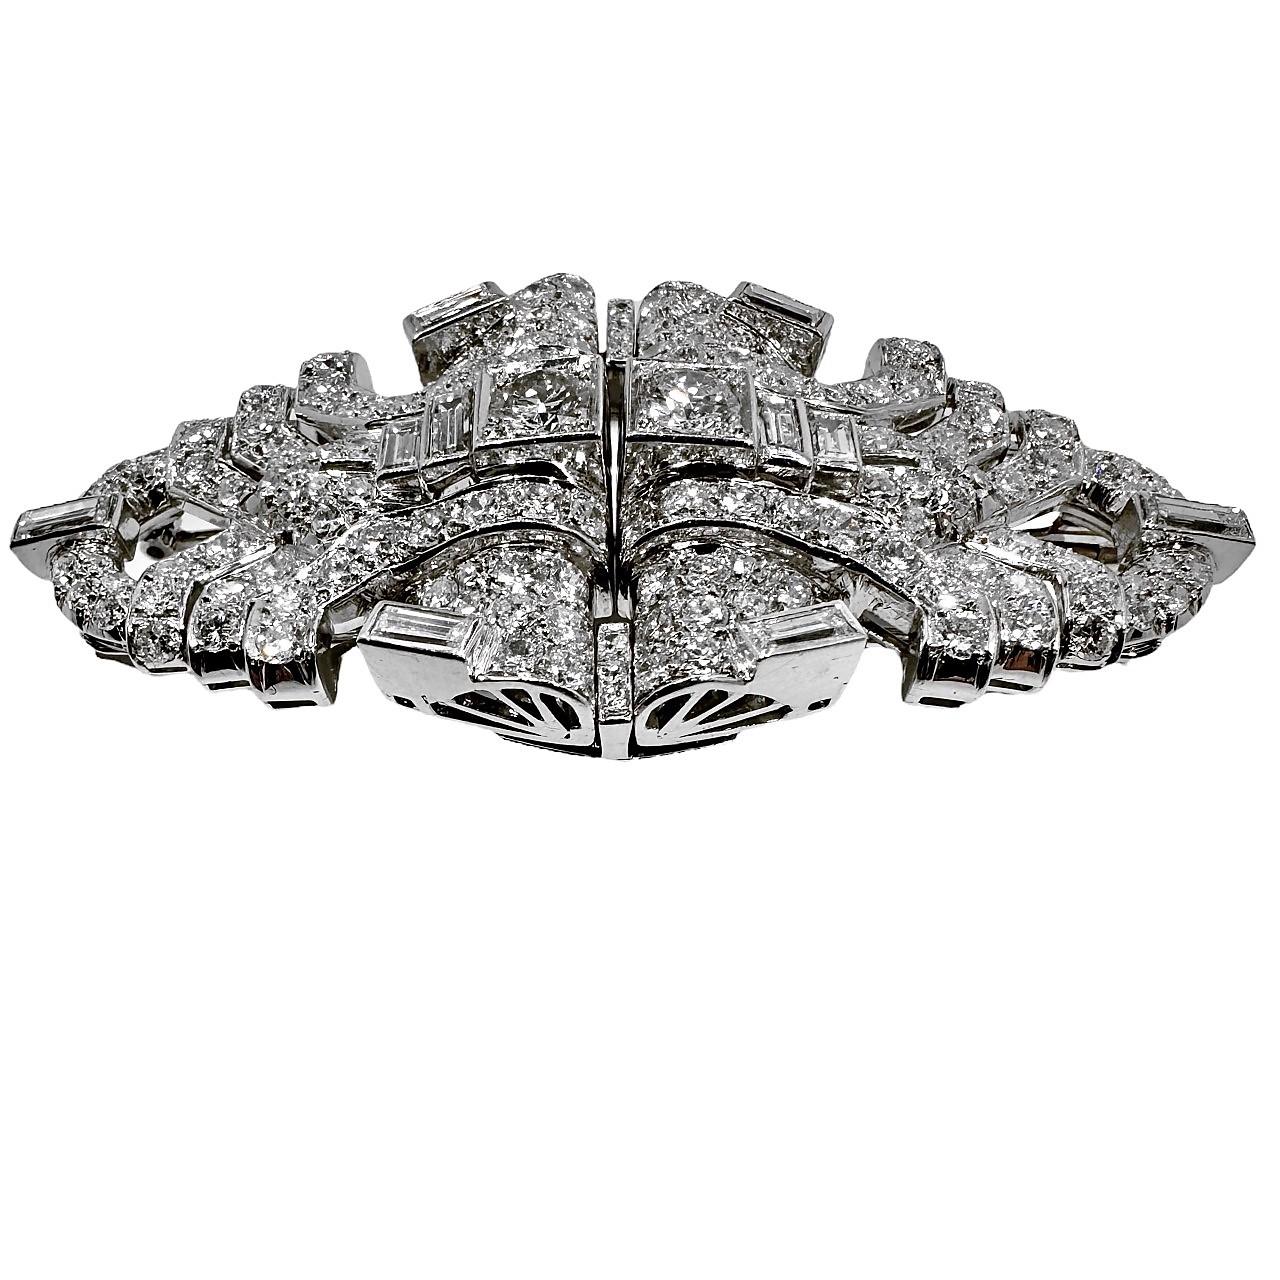 This striking and exquisitely designed pair of original Art-Deco period platinum and diamond double clips are very substantial in size, measuring almost 2 3/4 inches, left to right and 1 5/16 inches from top to bottom of the design area. They are